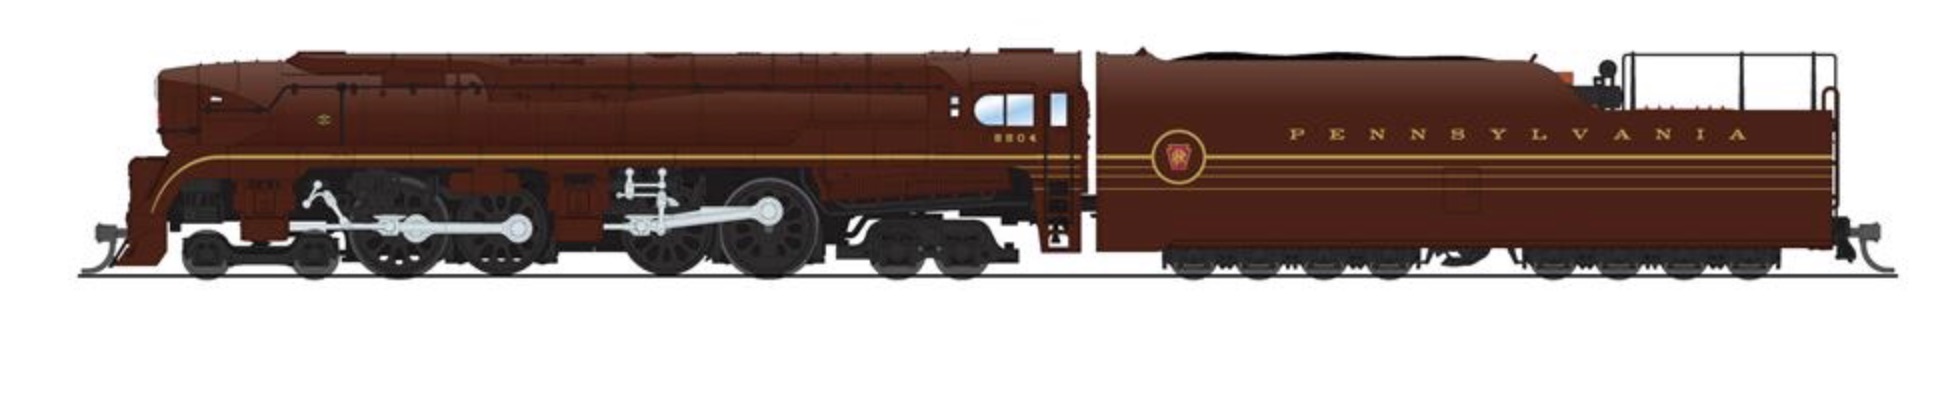 N Scale - Broadway Limited - 9027 - Locomotive, Steam, 4-4-4-4 T1 - Pennsylvania - 5504